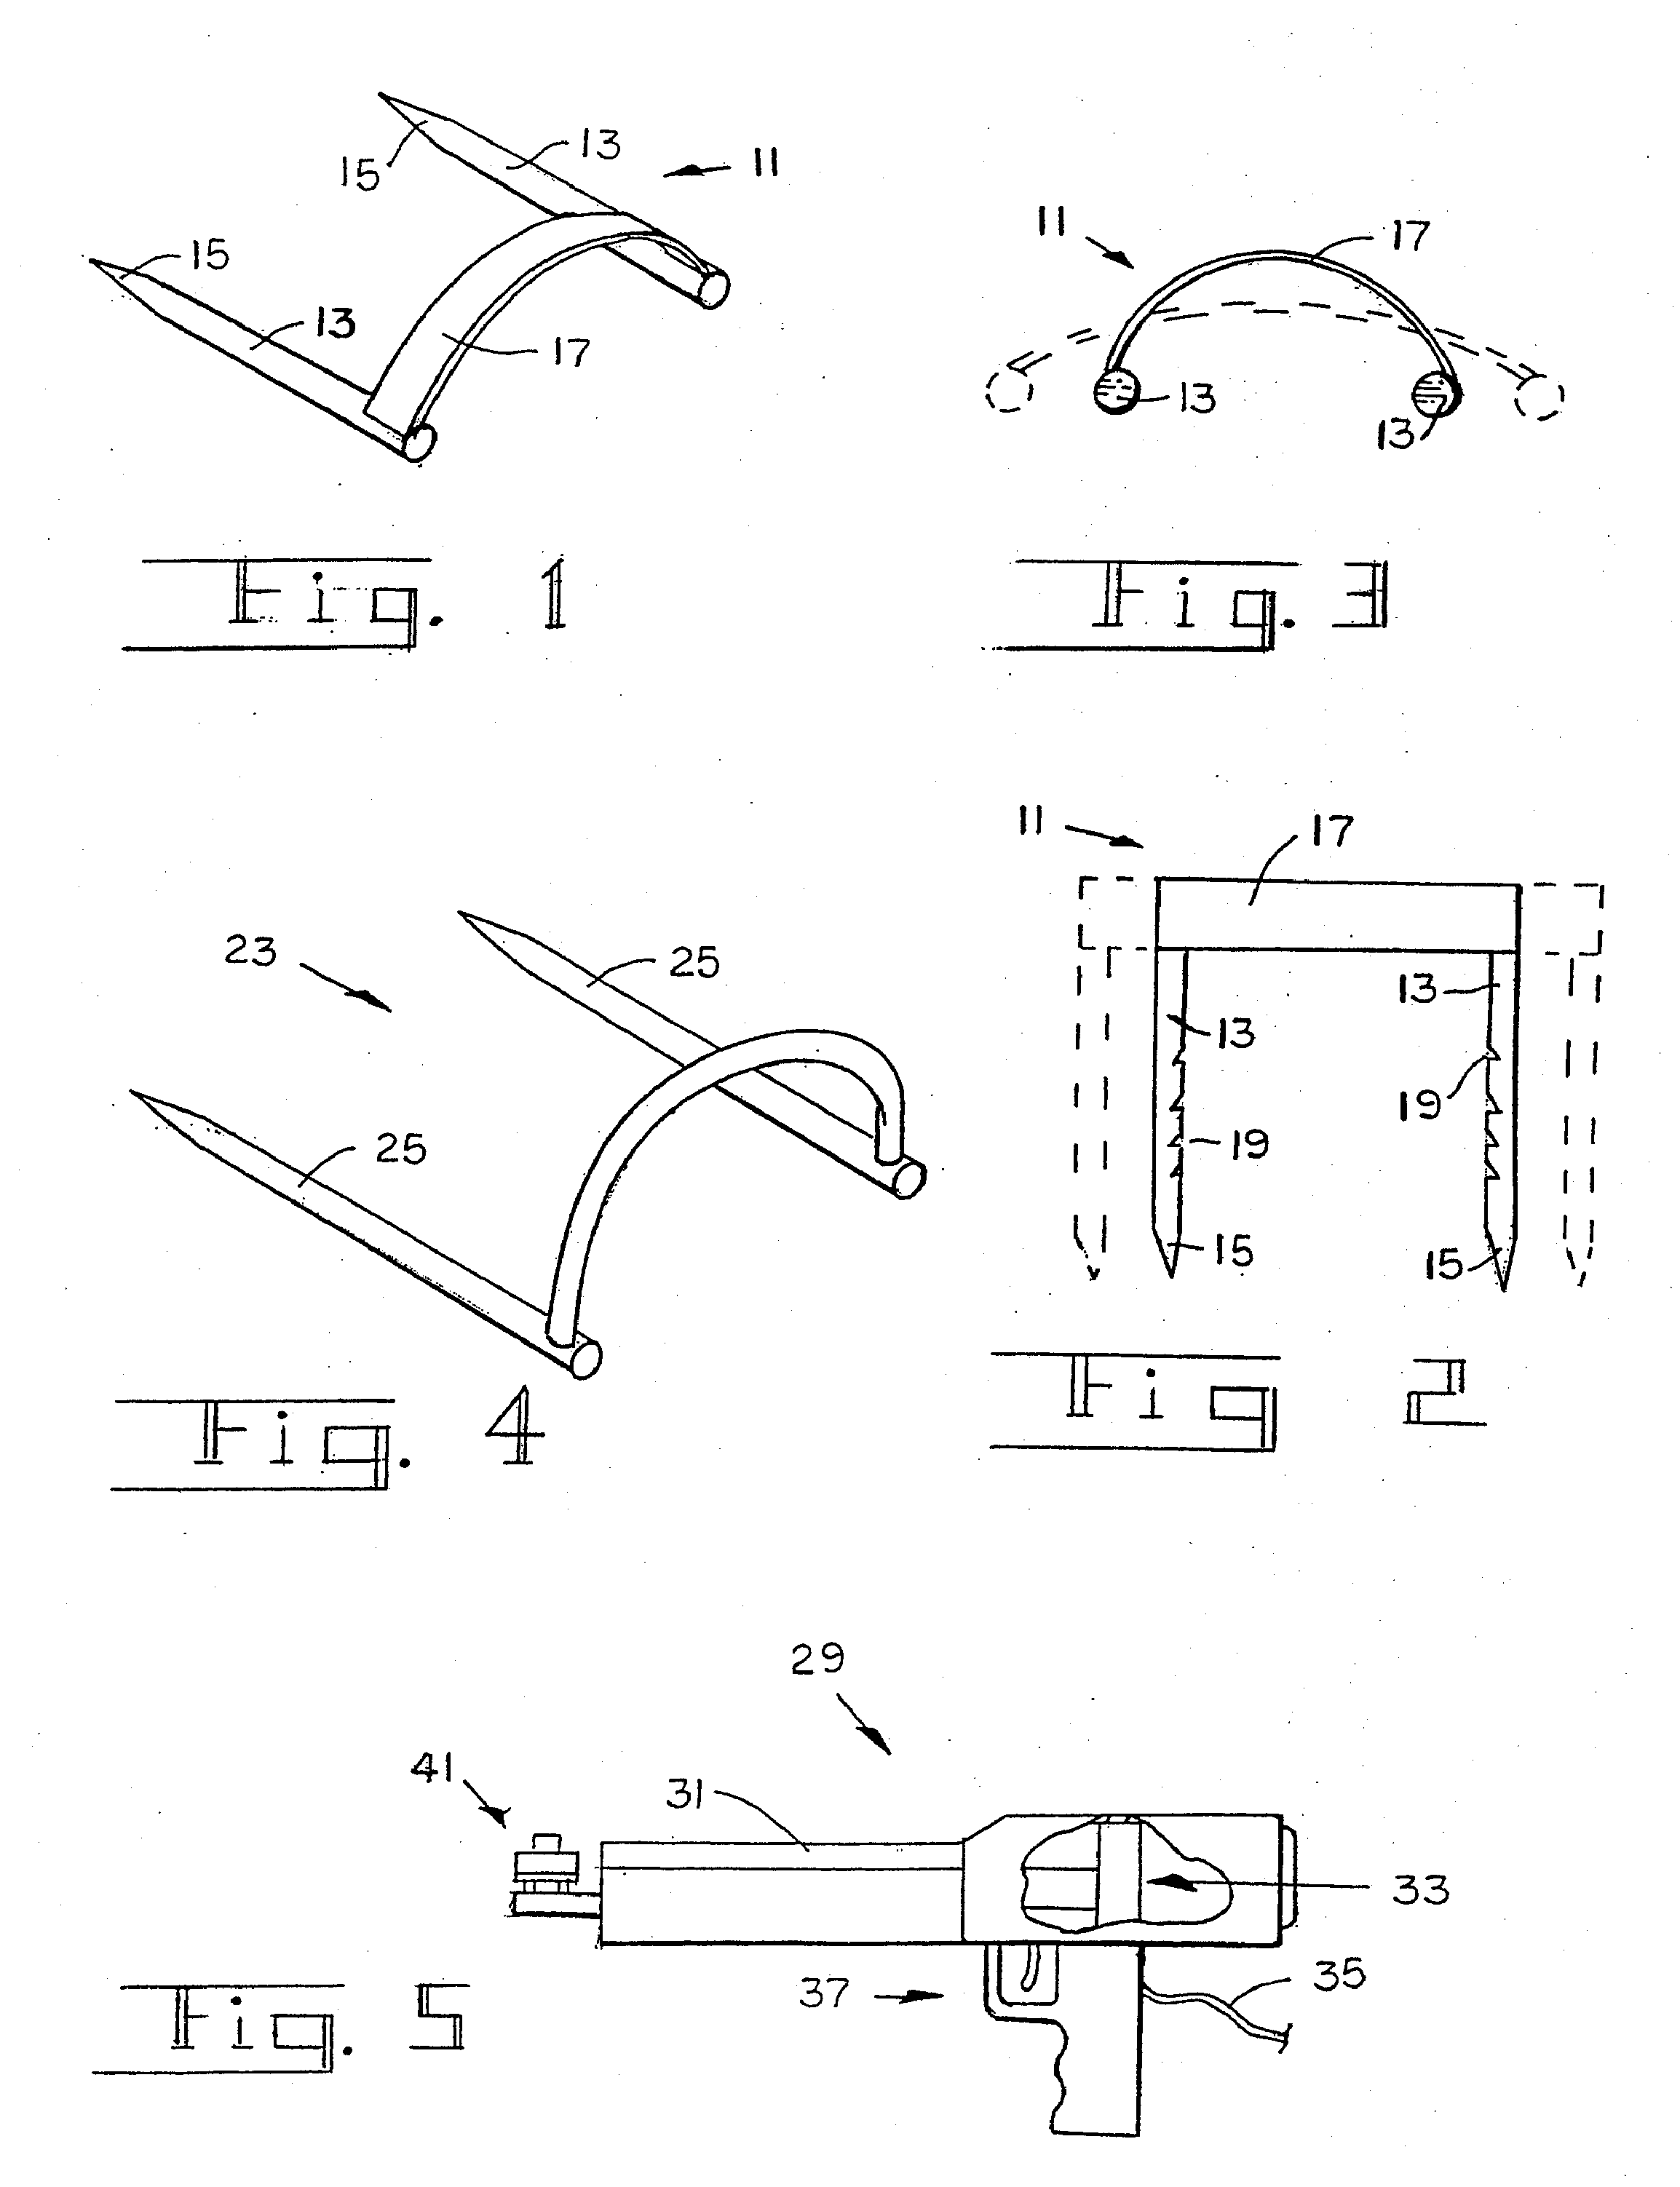 Compression bone staple, apparatus and method of the invention